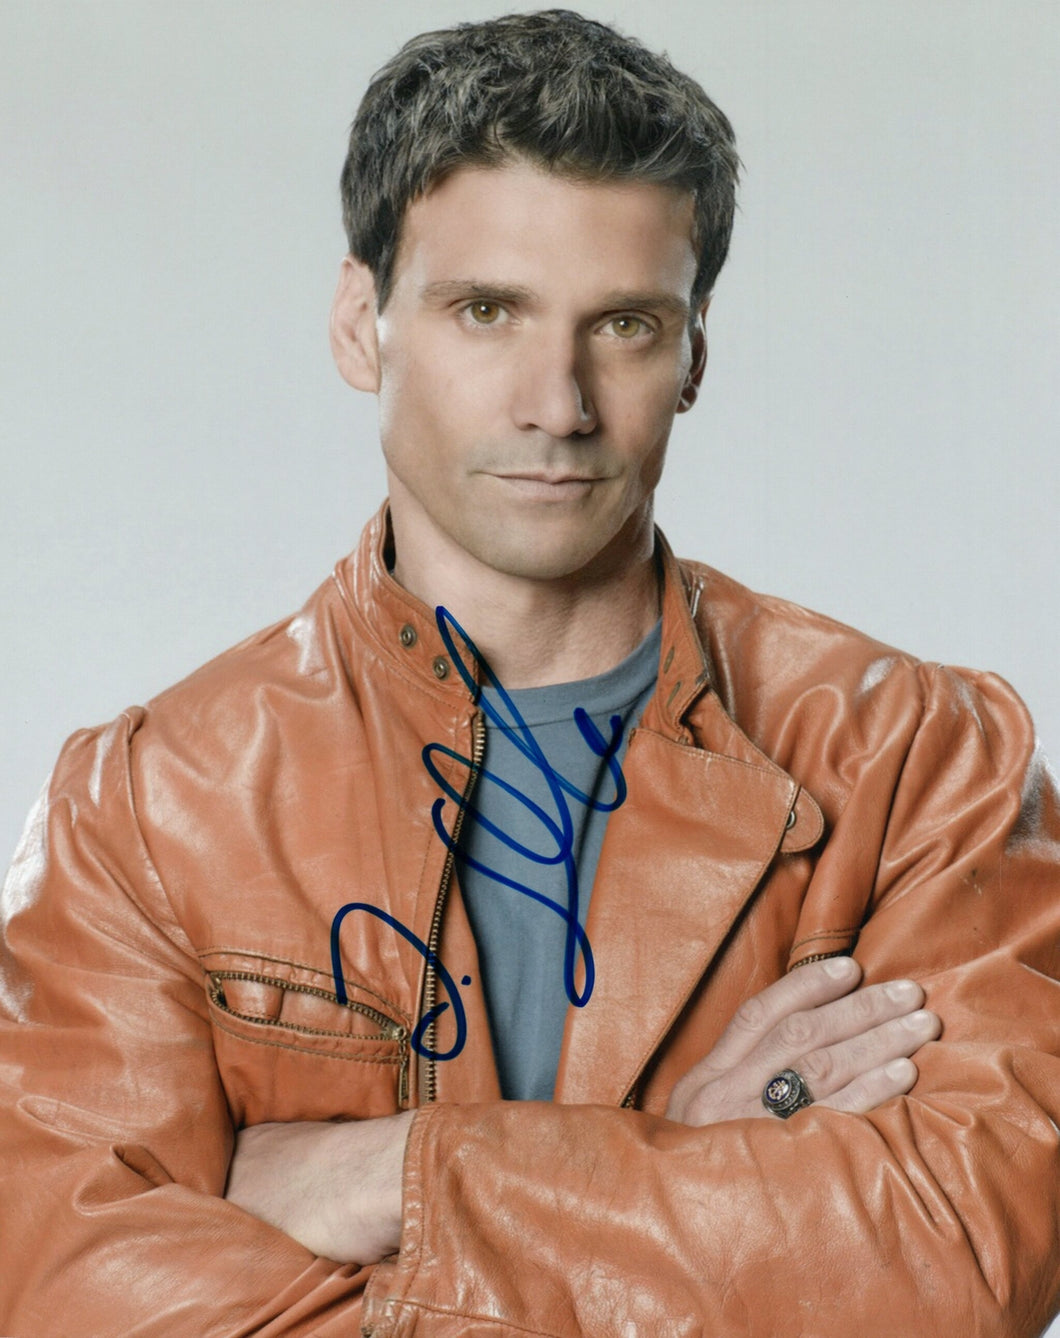 Frank Grillo Autographed Signed 8x10 Photo